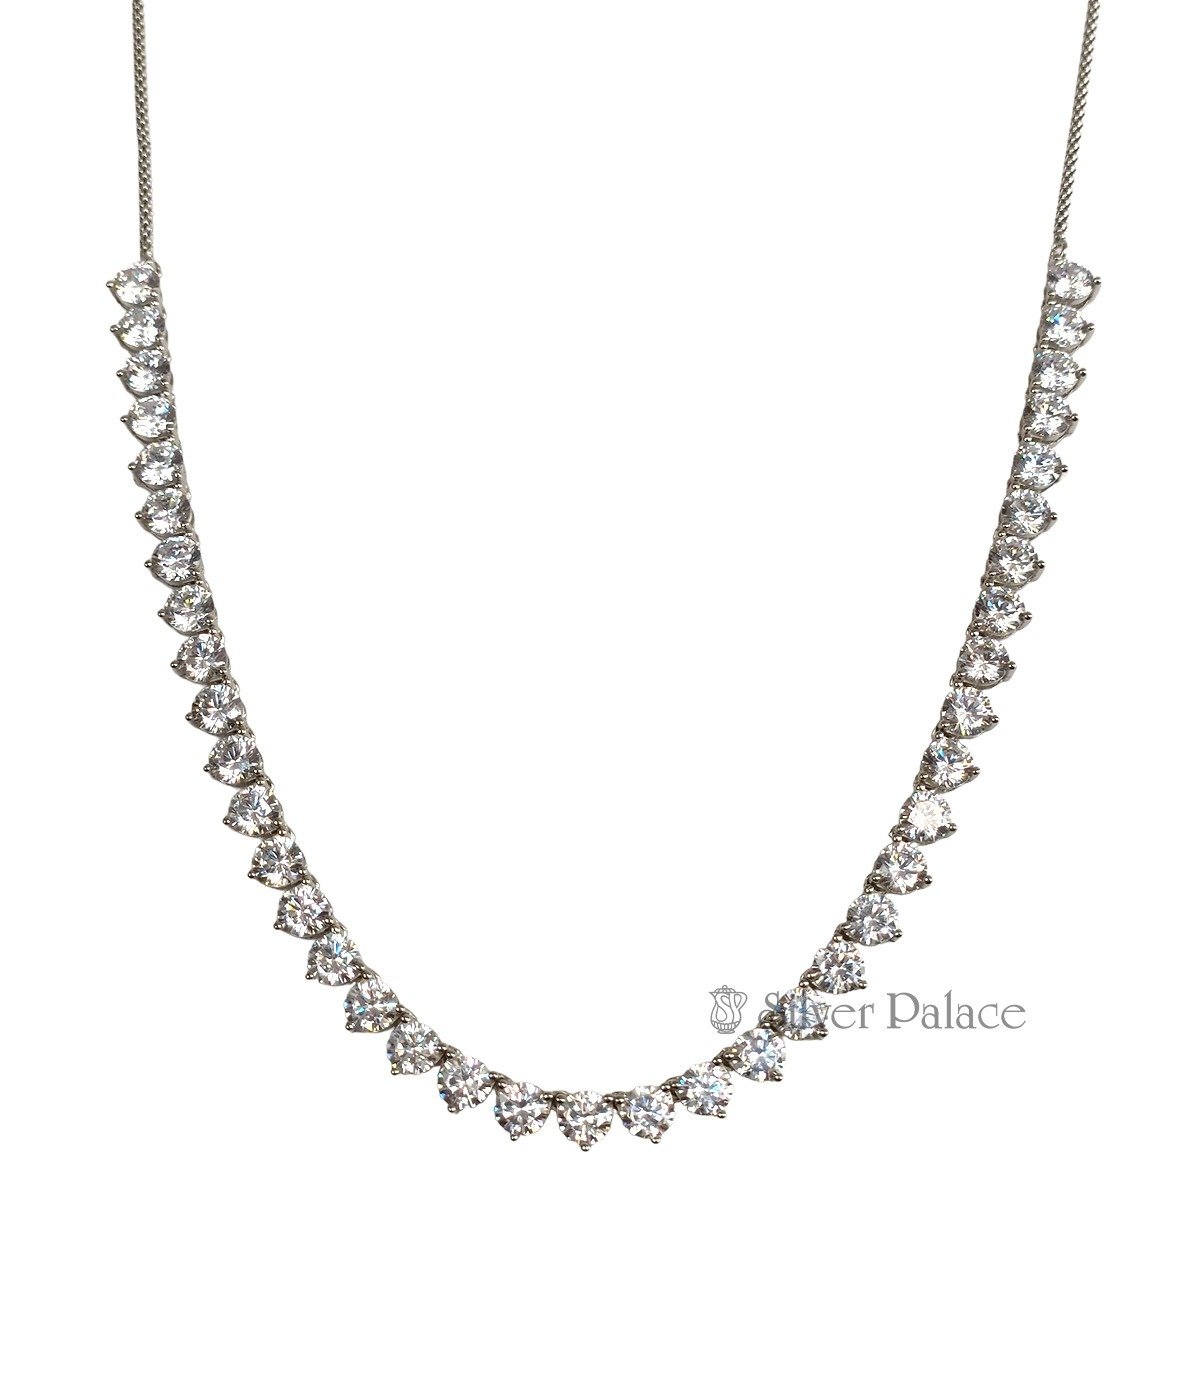 92.5 STERLING SILVER SOLITAIRE NECKLACE